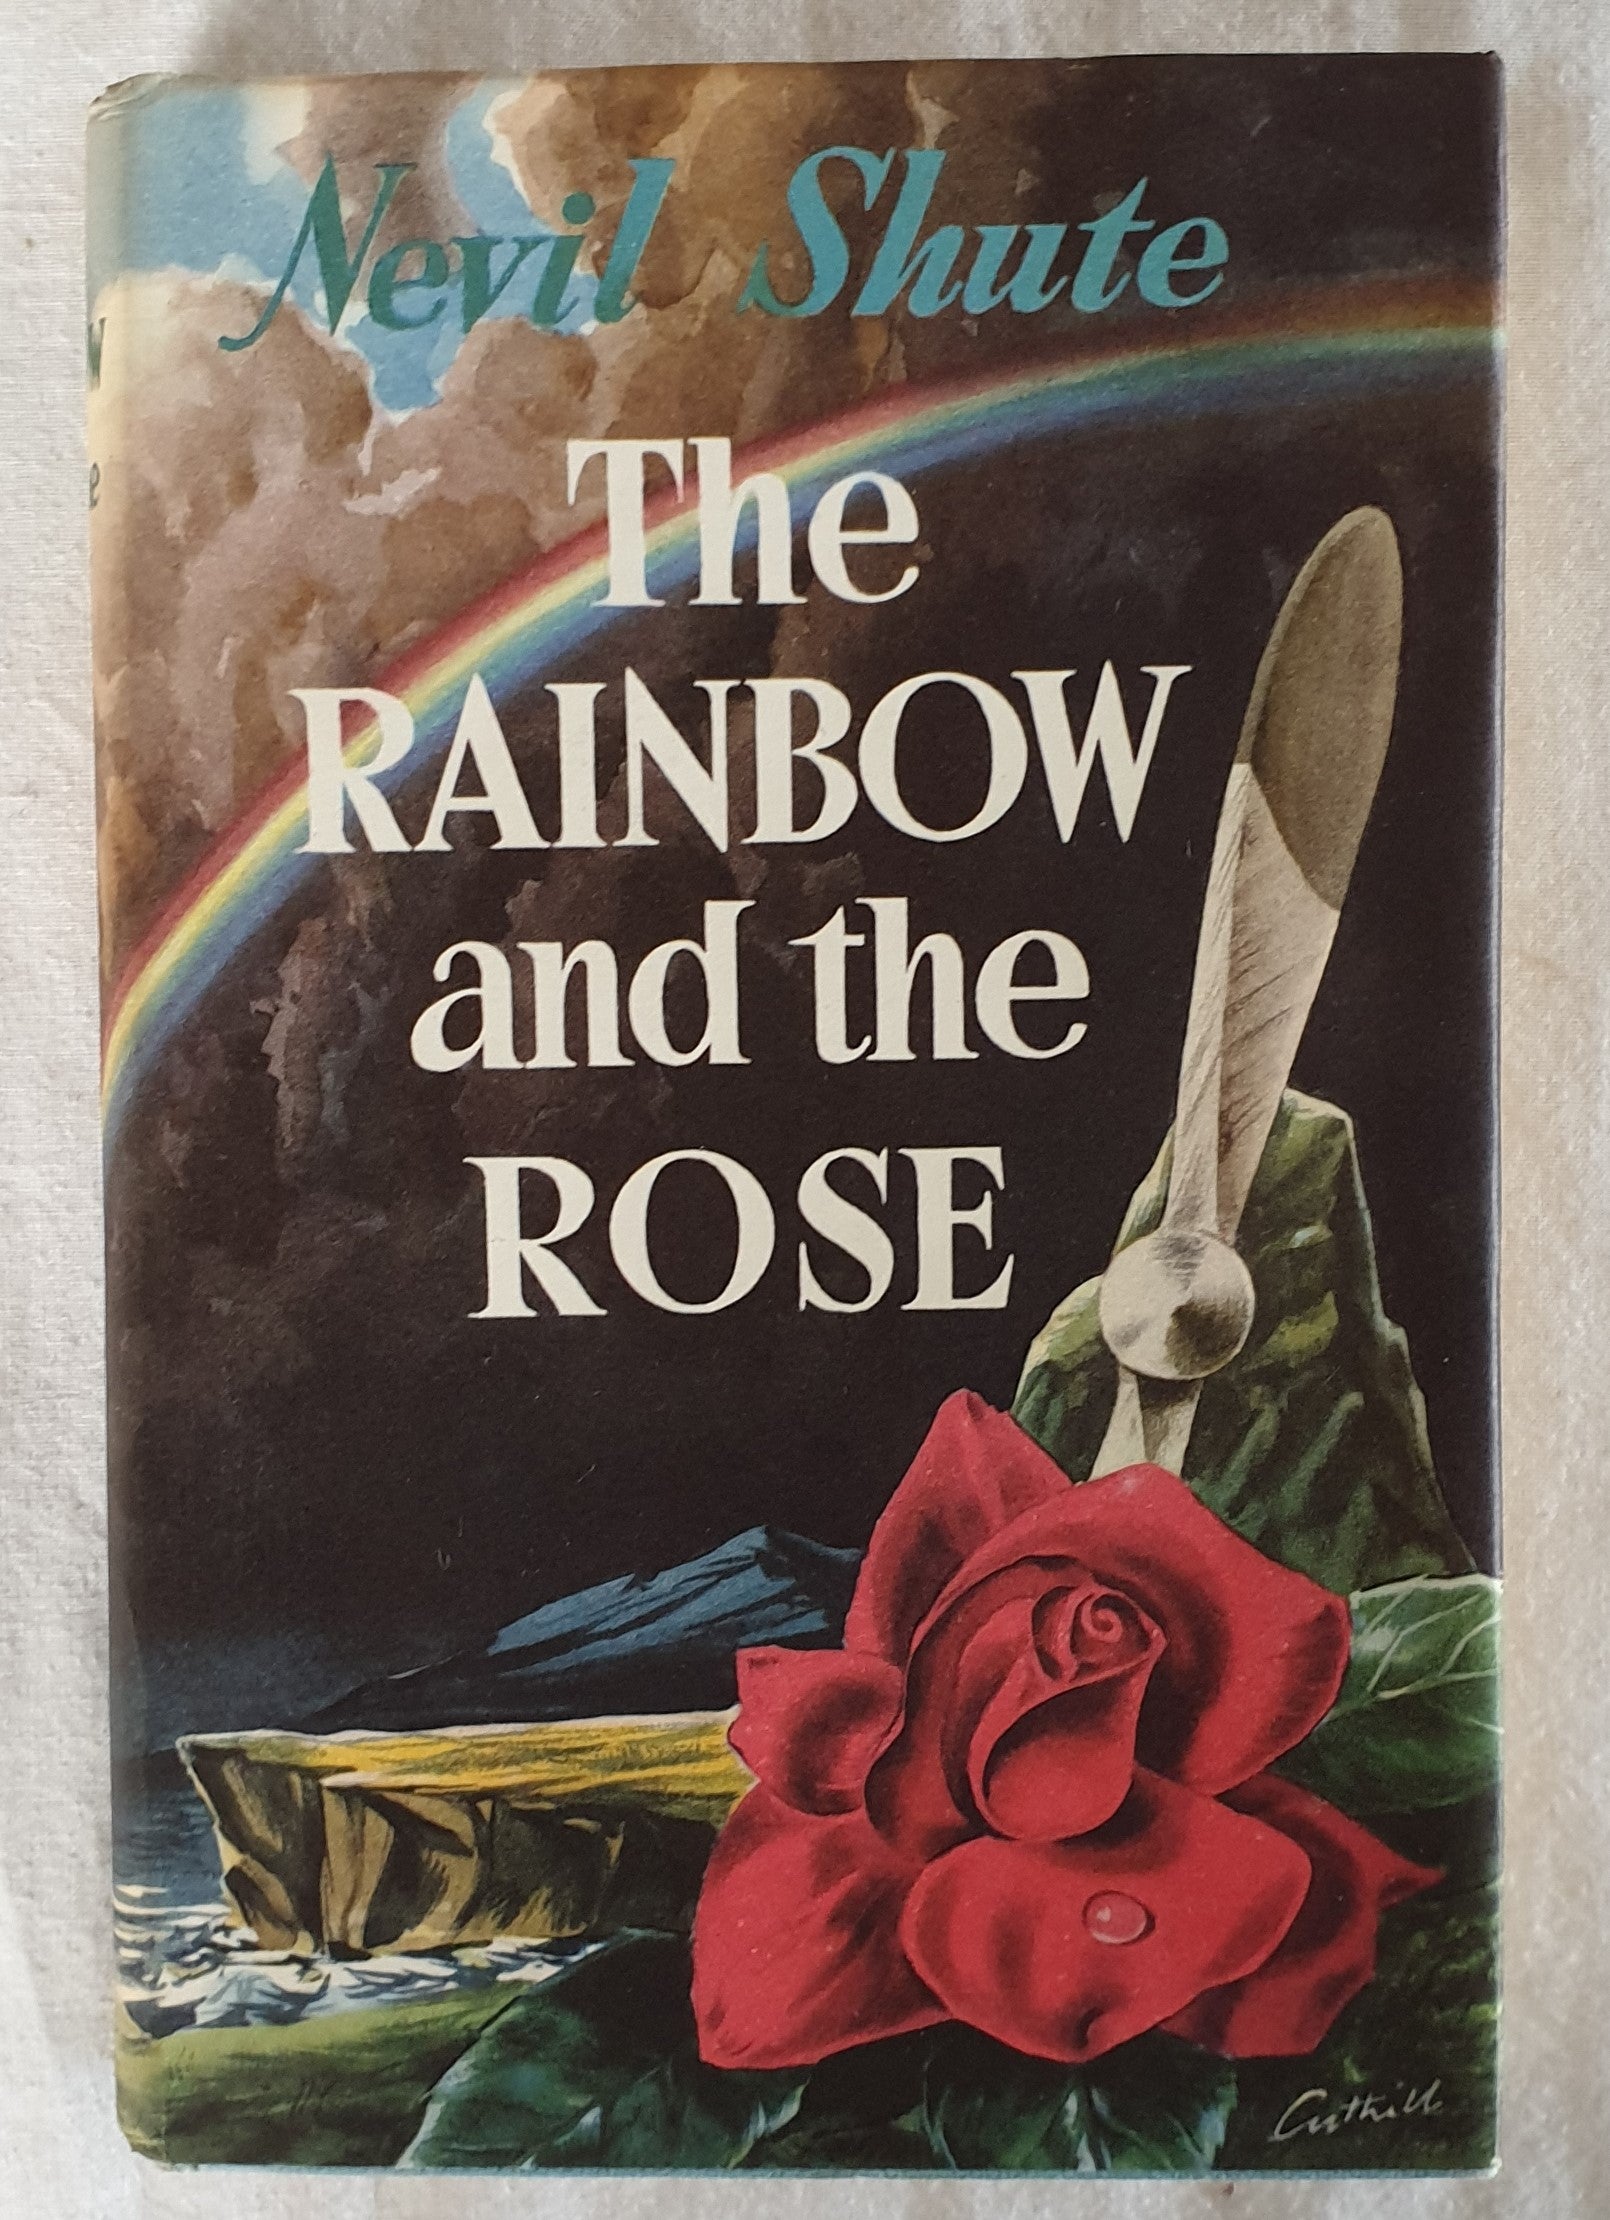 The Rainbow and the Rose by Nevil Shute